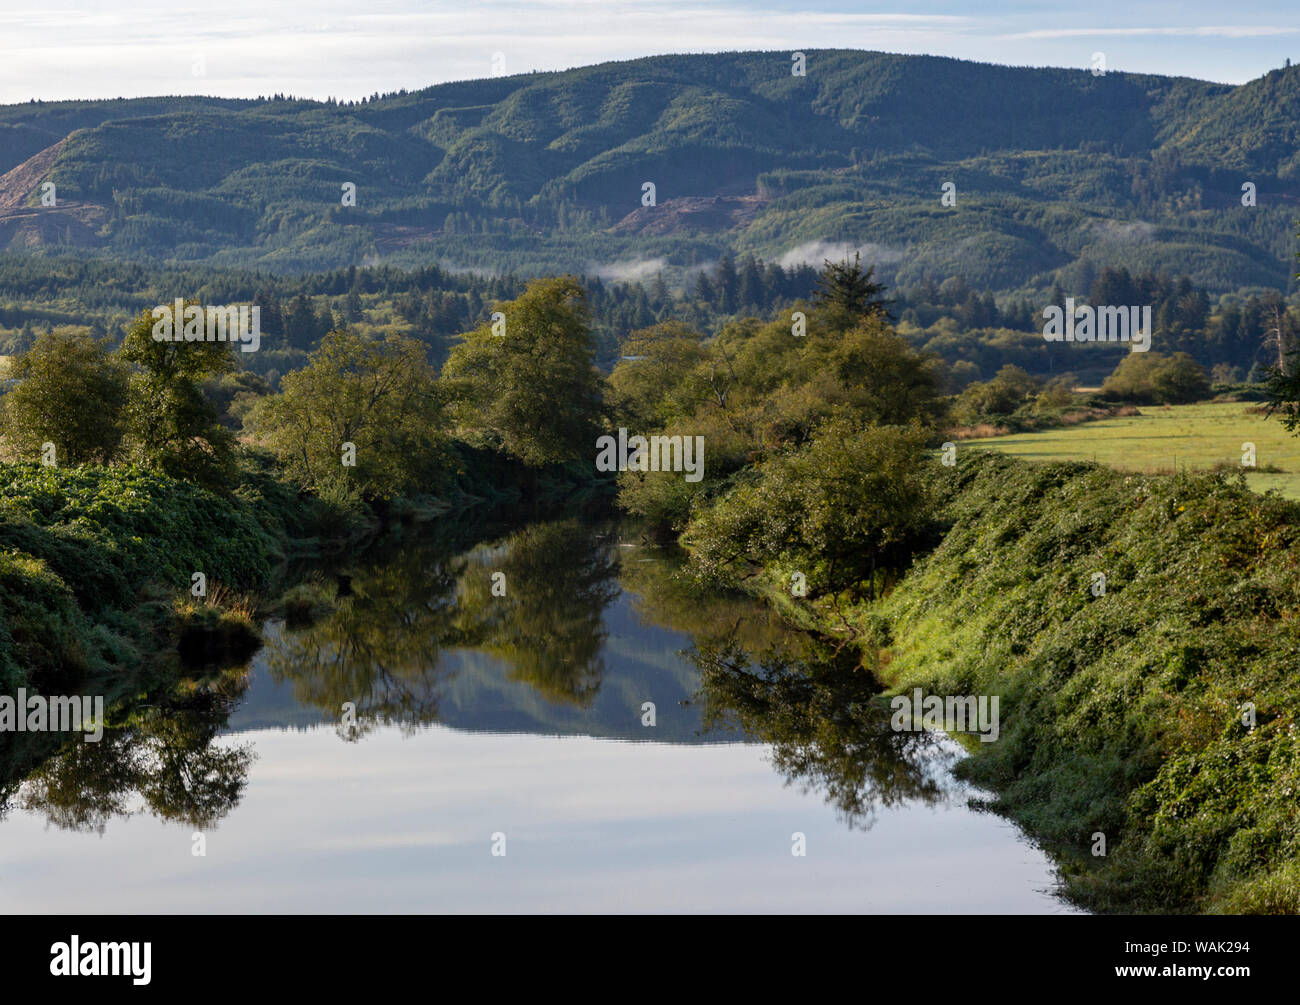 USA, Oregon, Nehalem. Morning landscape with mountain and river. Credit as: Wendy Kaveney / Jaynes Gallery / DanitaDelimont.com Stock Photo